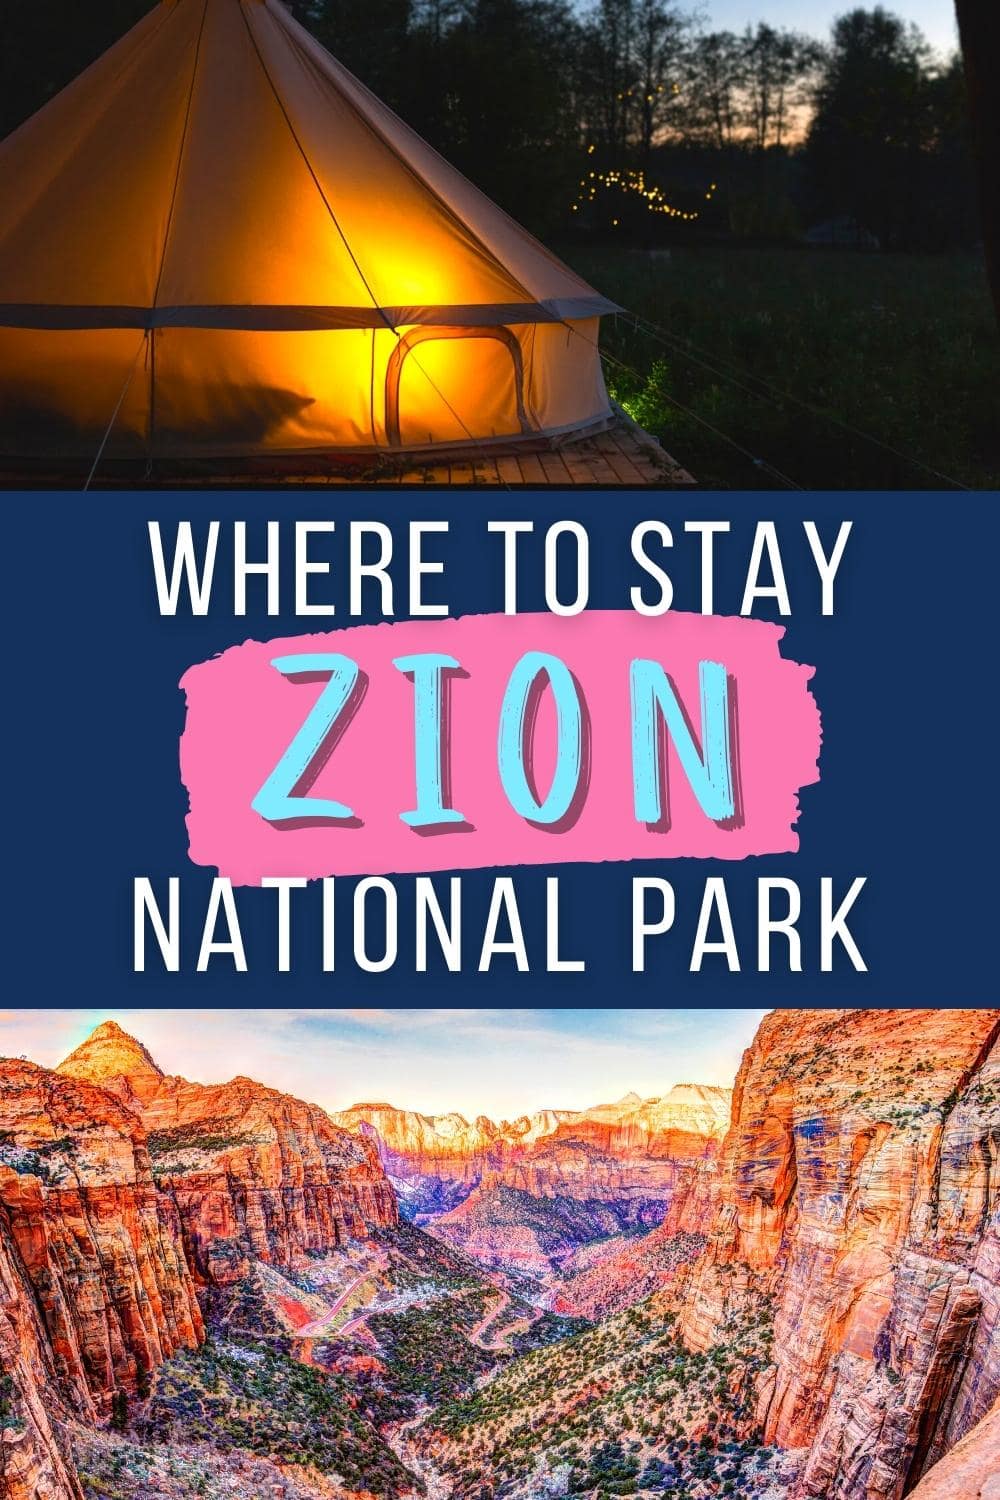 Where to Stay when Visiting Zion National Park